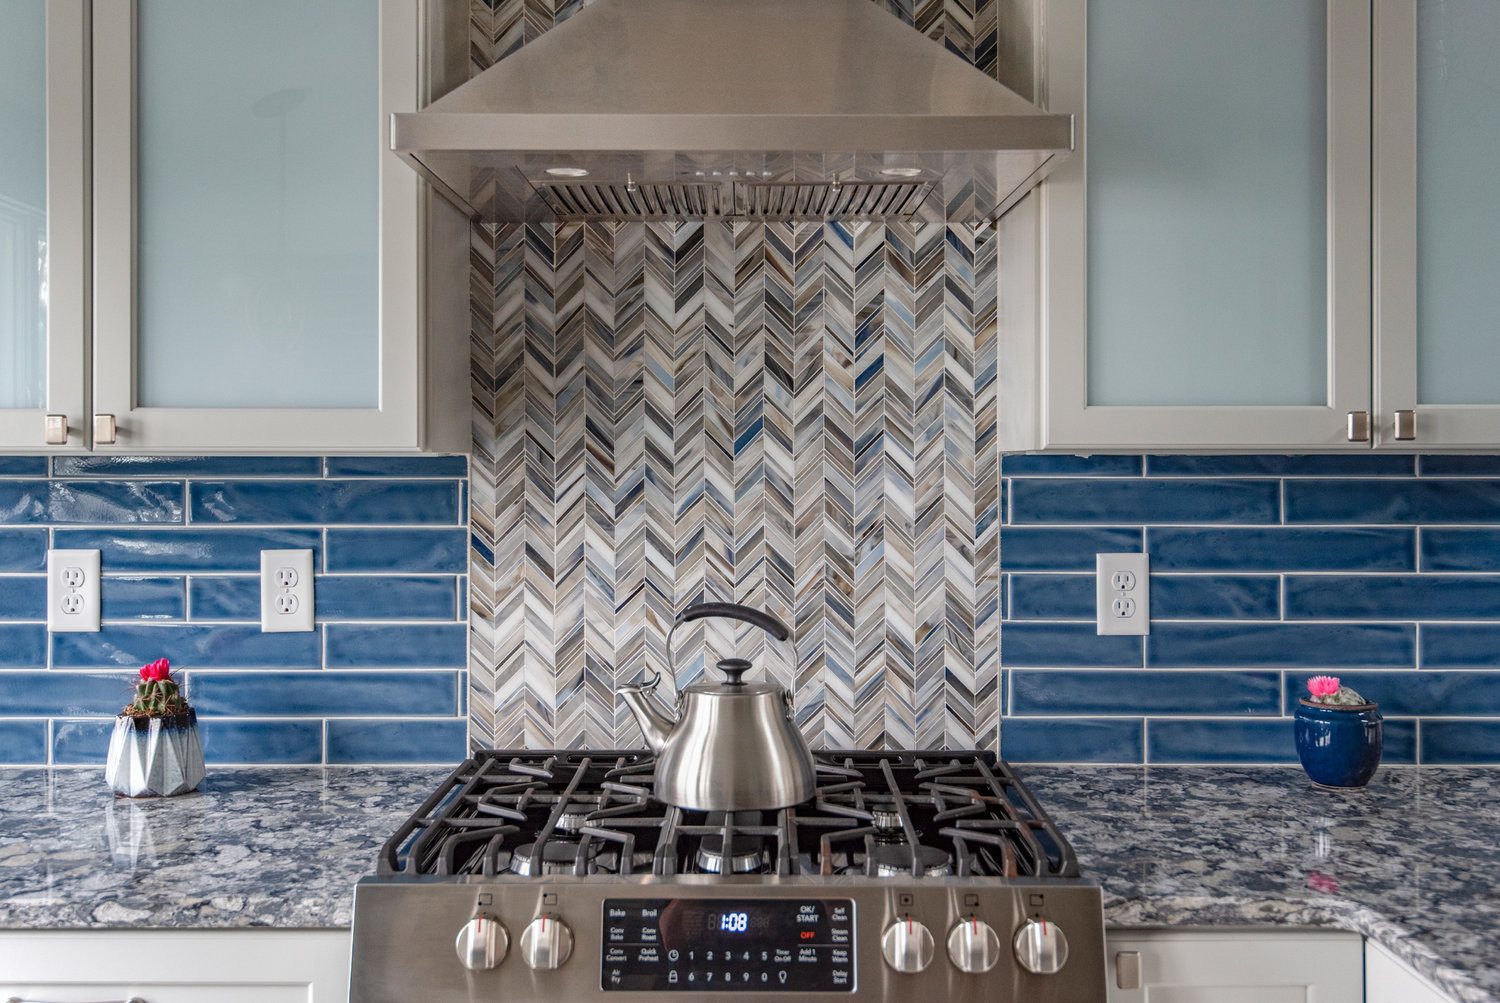 Chevron is distinguishable by an upside-down V pattern where each side meets at the point without interruption, creating a zig-zag. It’s often confused with a herringbone pattern, which has a broken 
zig-zag due to one rectangle cut so that 
the end of one tile or plank meets to the 
side of the other